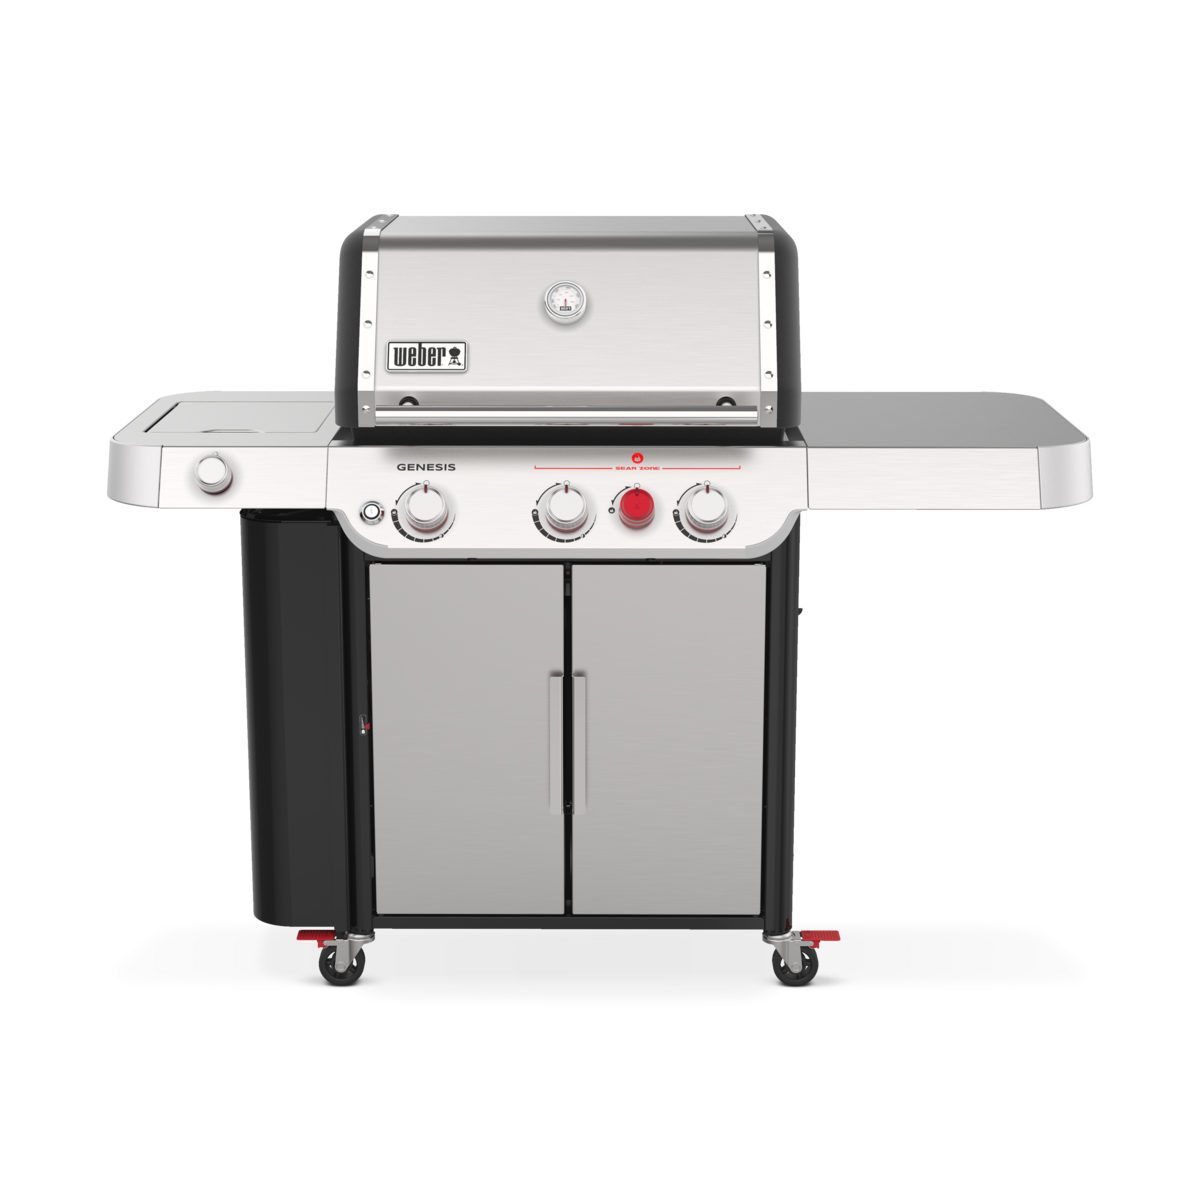 WEBER GENESIS S-335 STAINLESS STEEL NATURAL GAS BBQ